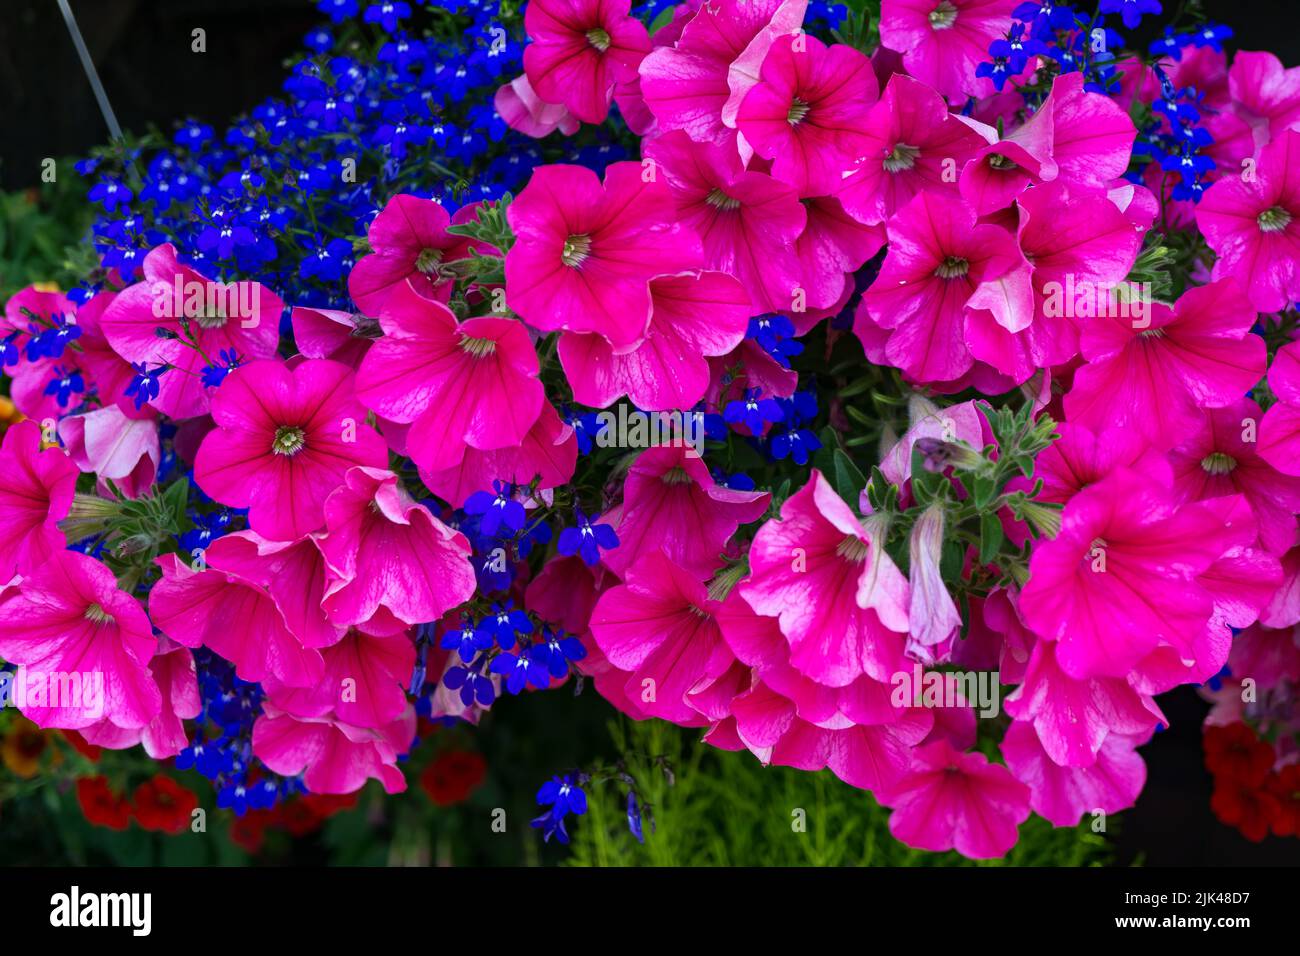 A close-up shot of pink flowers in a hanging basket in West Seattle, Washington. Stock Photo